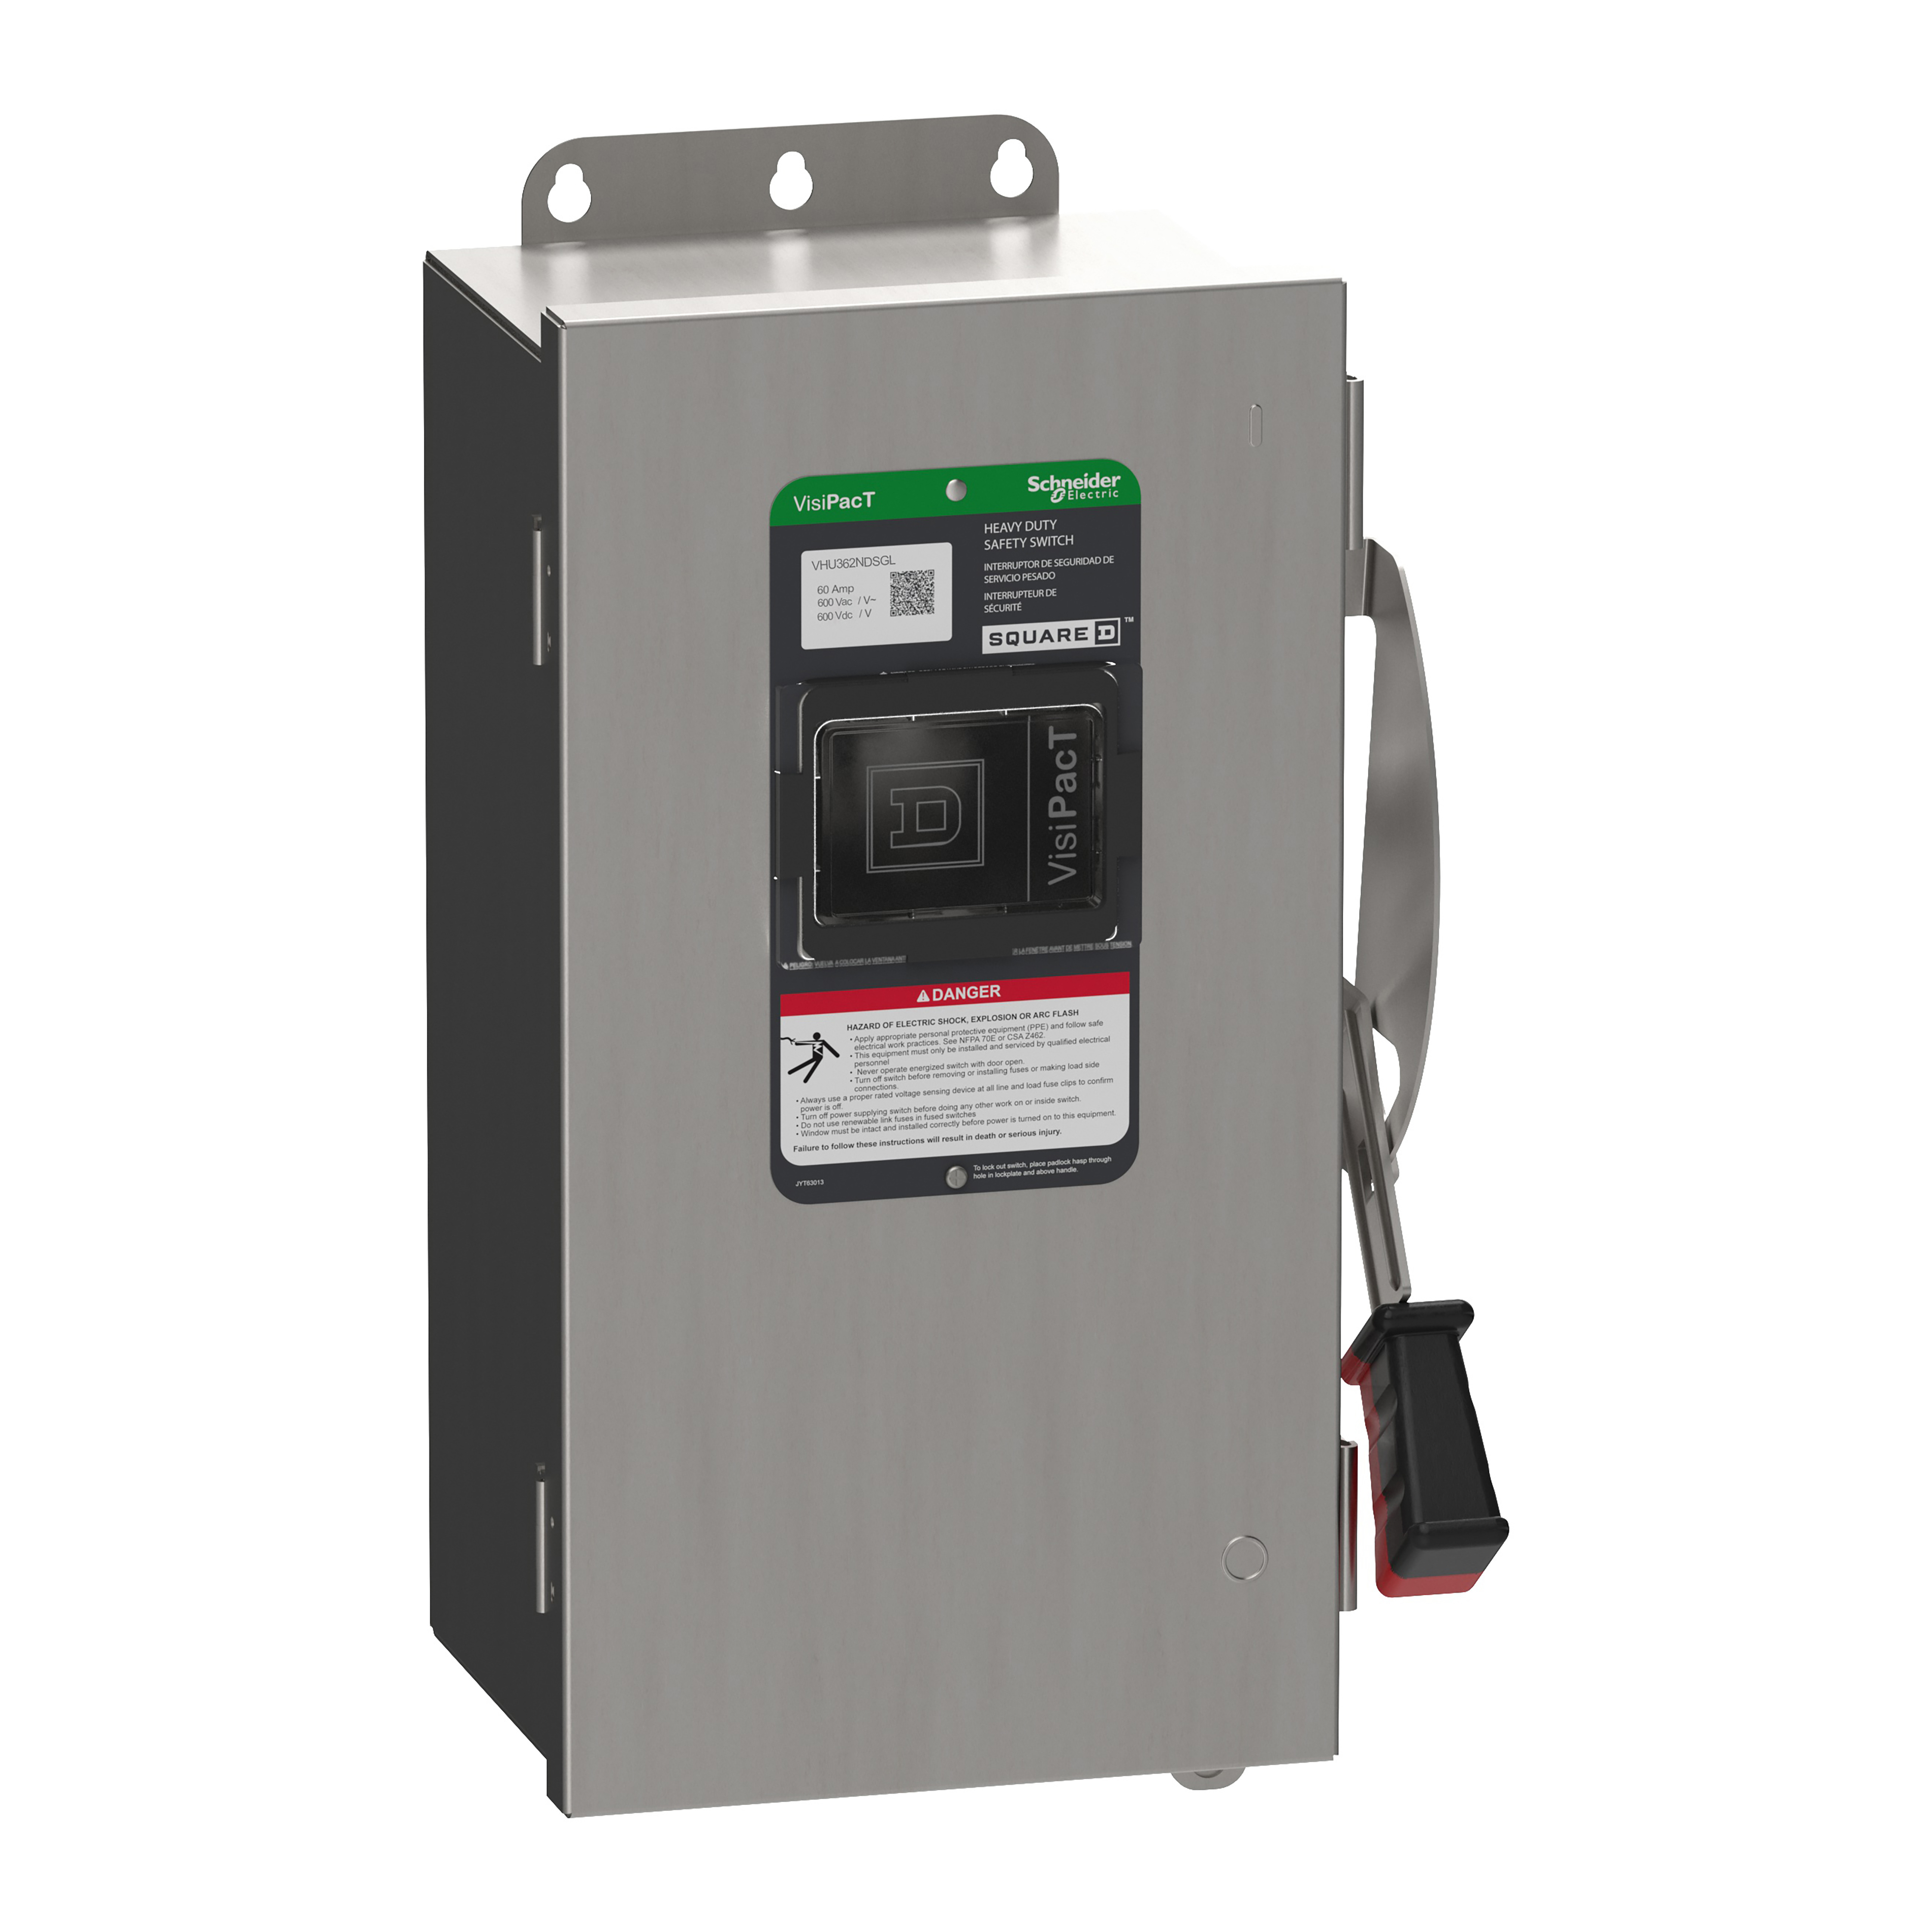 Safety switch, heavy duty, unfused, viewing window, NEMA 4X, 600V, 60A, 3 pole, neutral installed, ground lugs